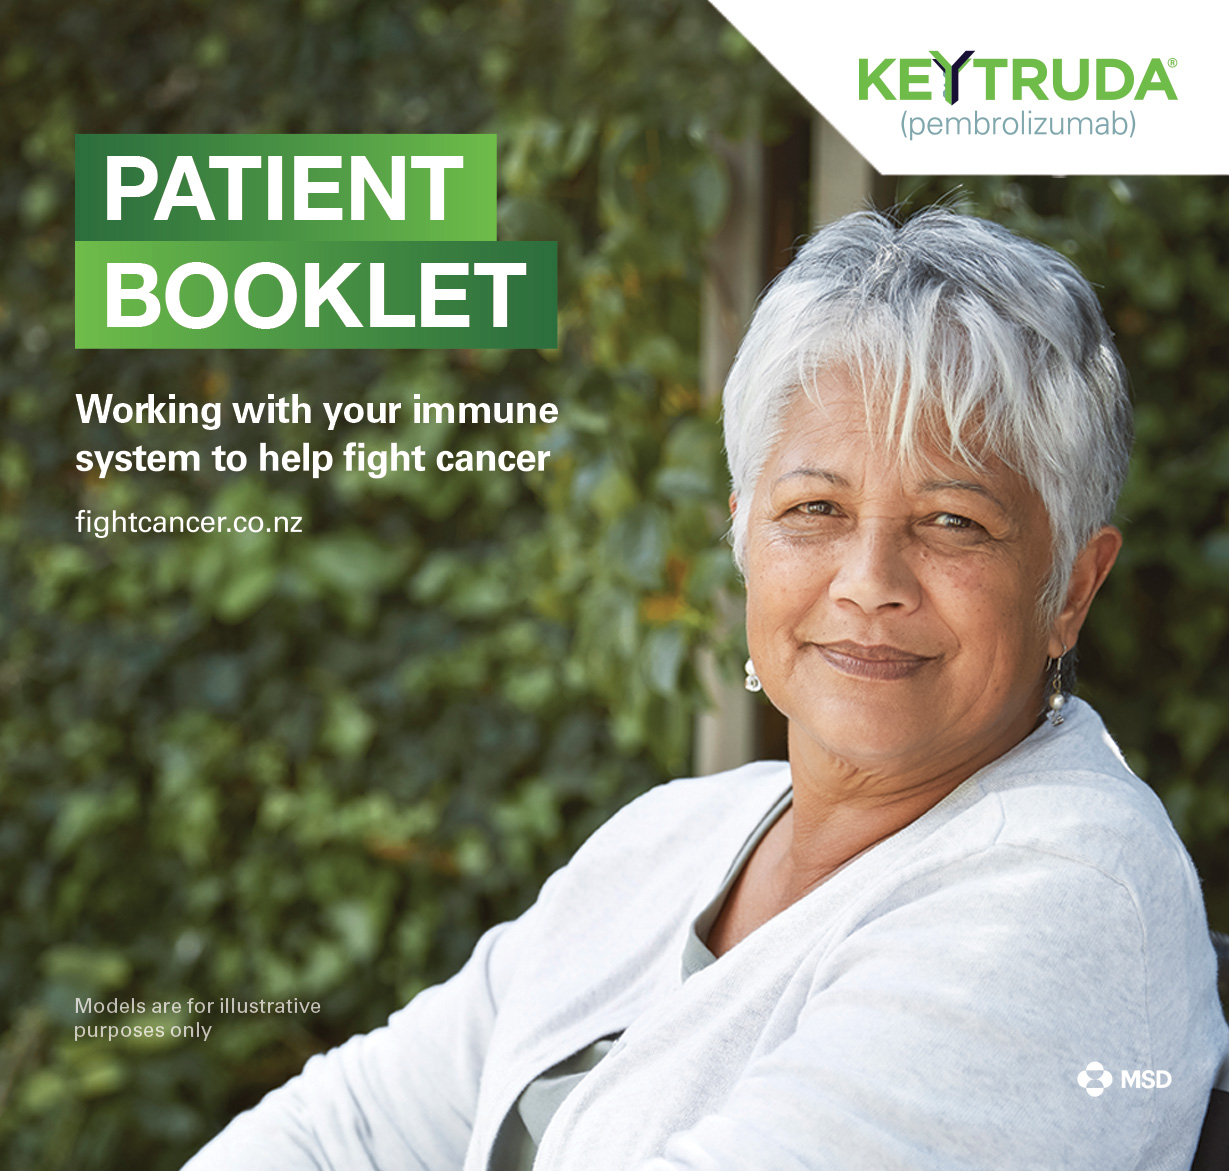 The cover of the English version of the KEYTRUDA Patient Booklet